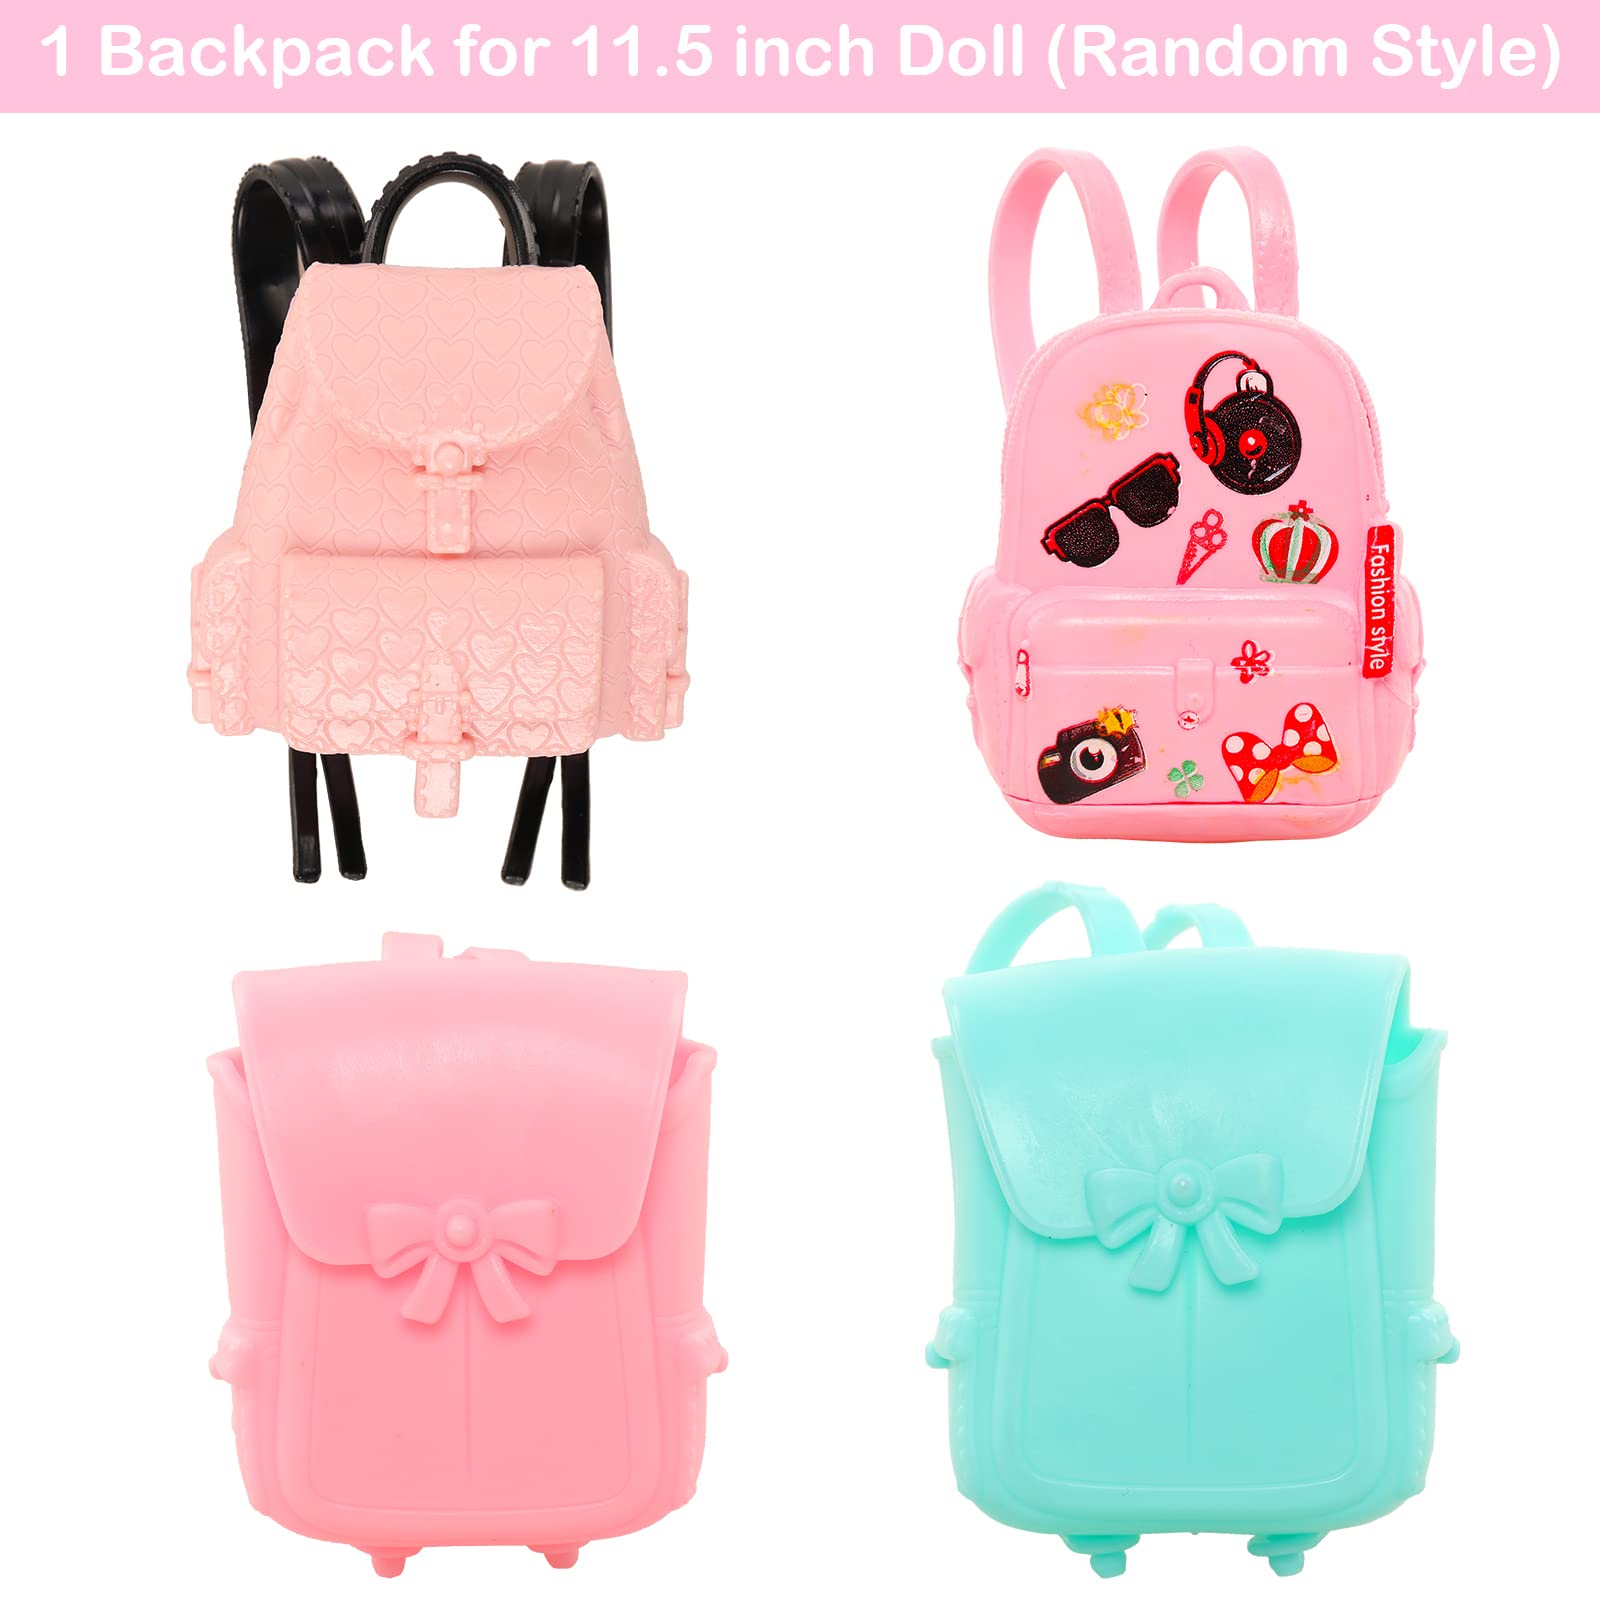 30 Pcs Doll Travel Playset 1 Luggage 1 Backpack 5 Doll Clothes 8 Travel Accessories 12 Toiletries1 Sunglasses for 11.5 Inch Girl Doll(Doll NOT Include)